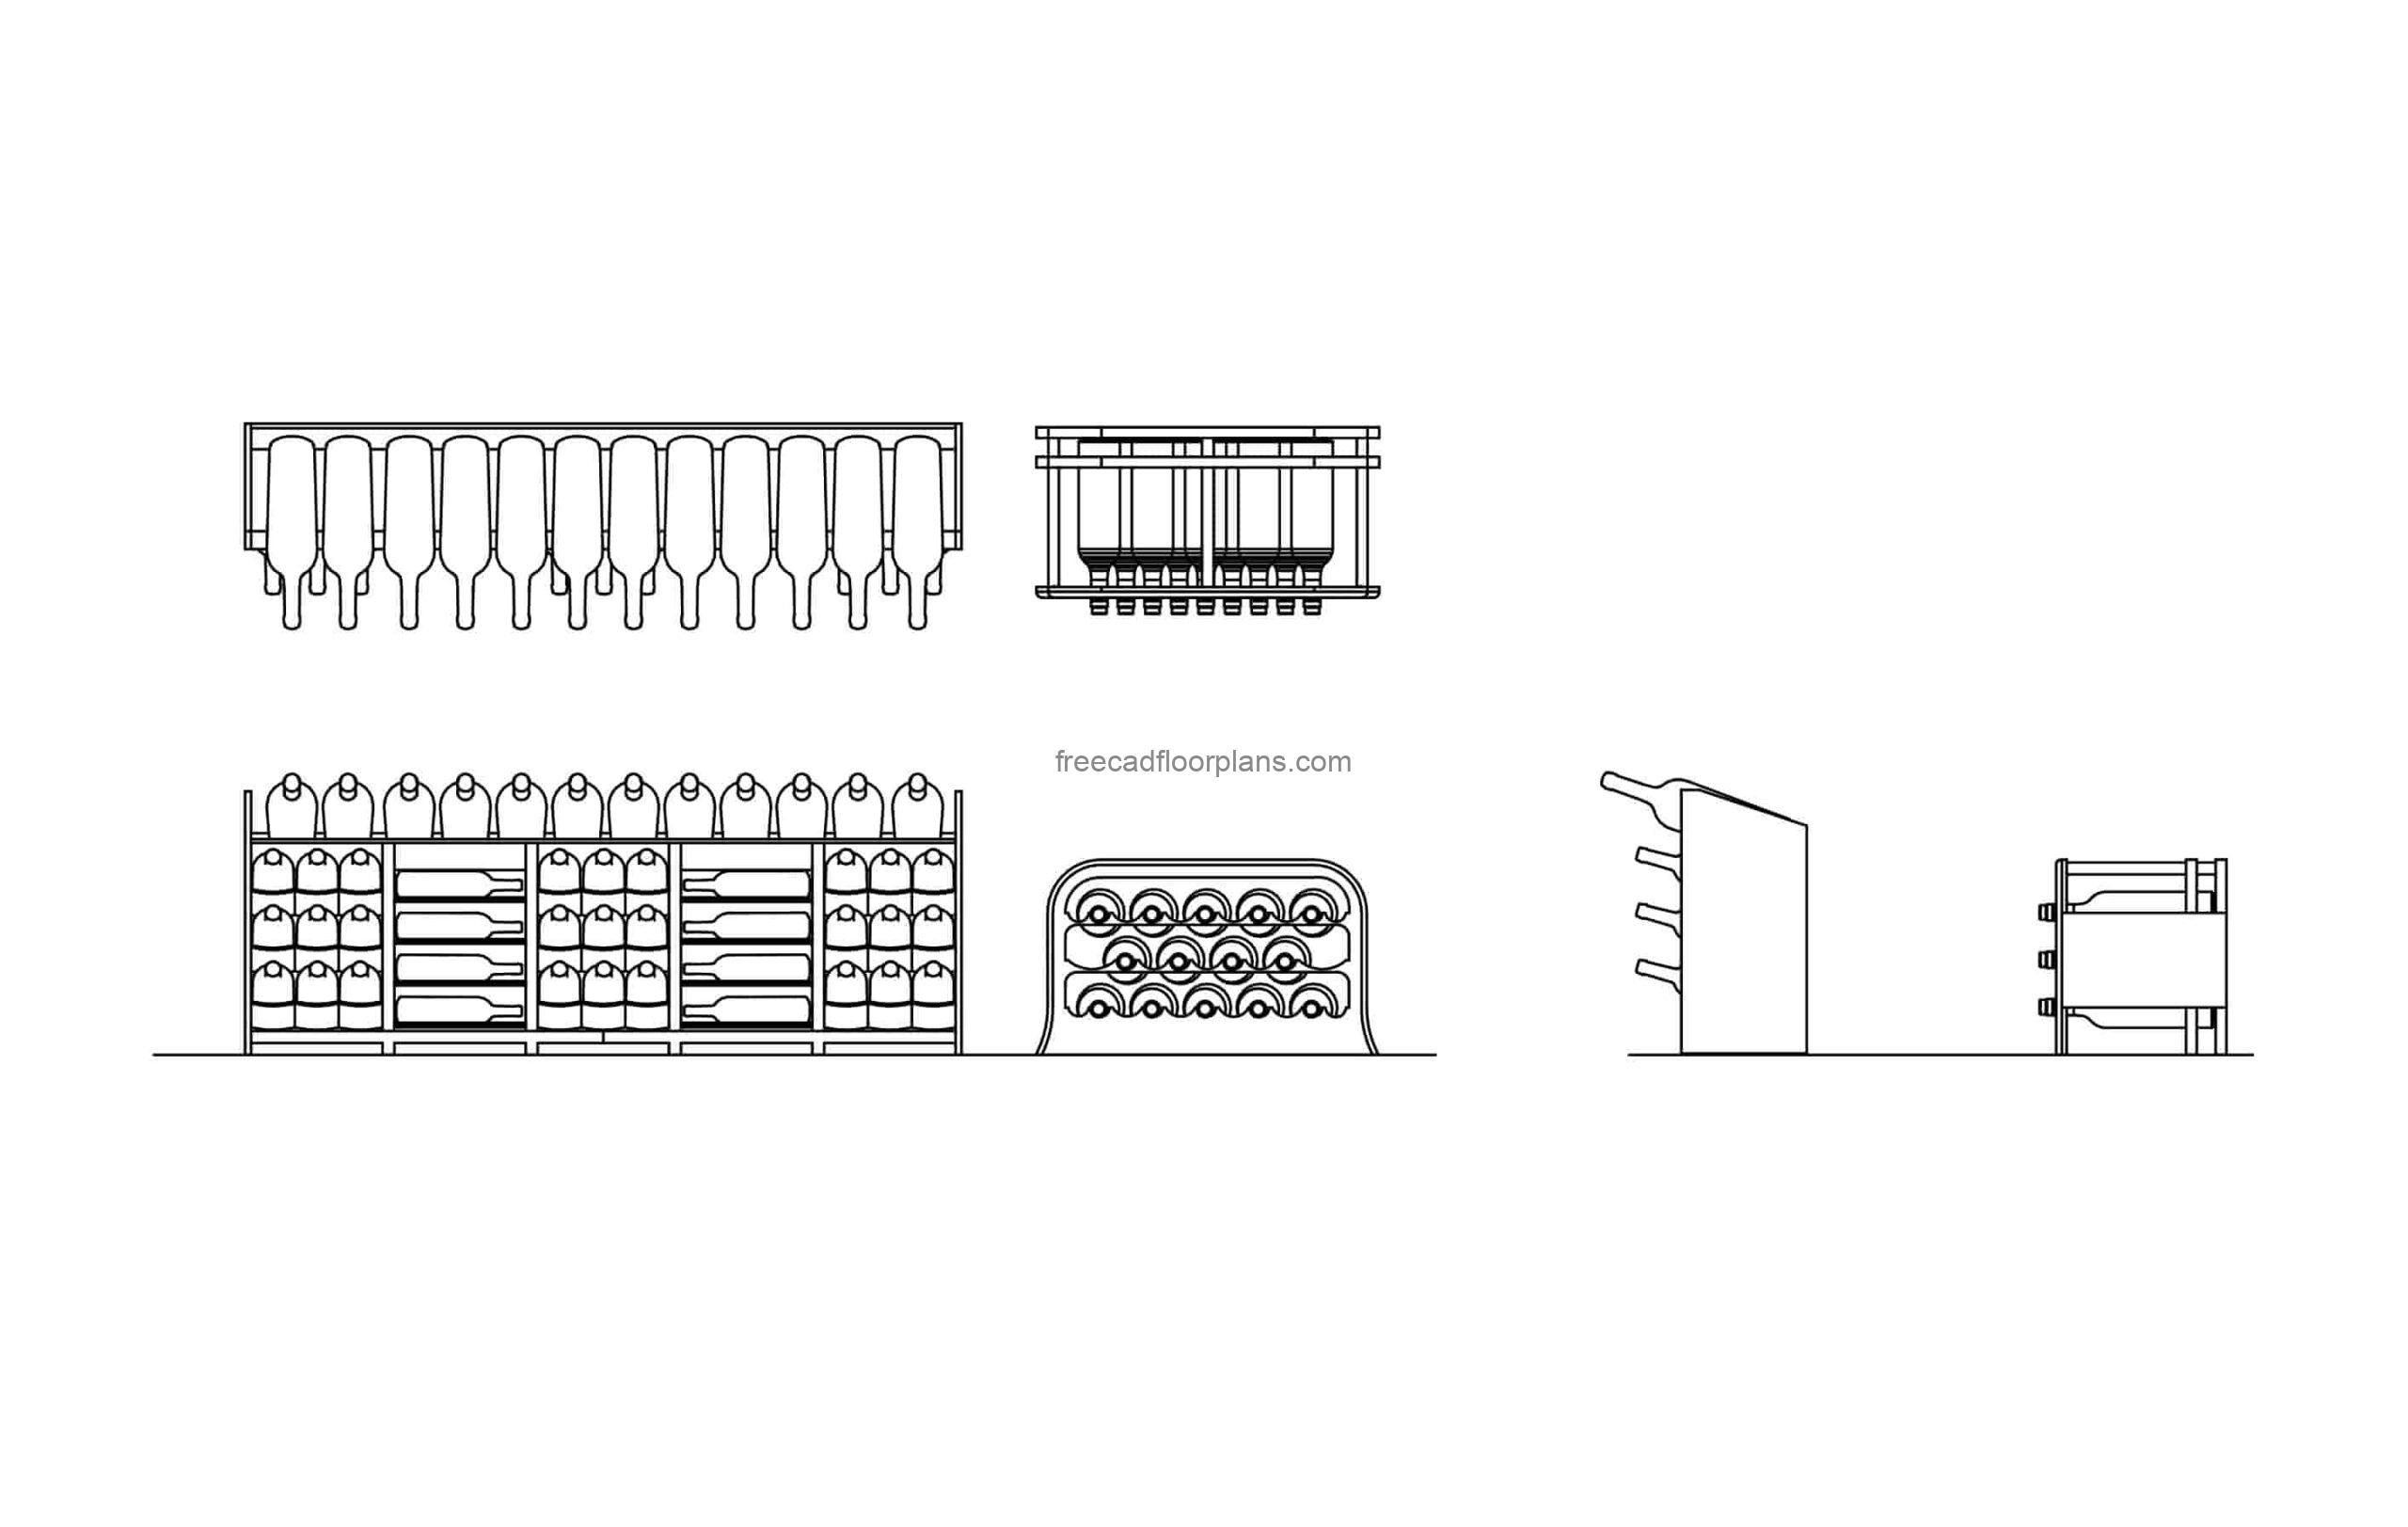 autocad drawing of different wine racks, cad block with 2d views, plans and elevations for free download